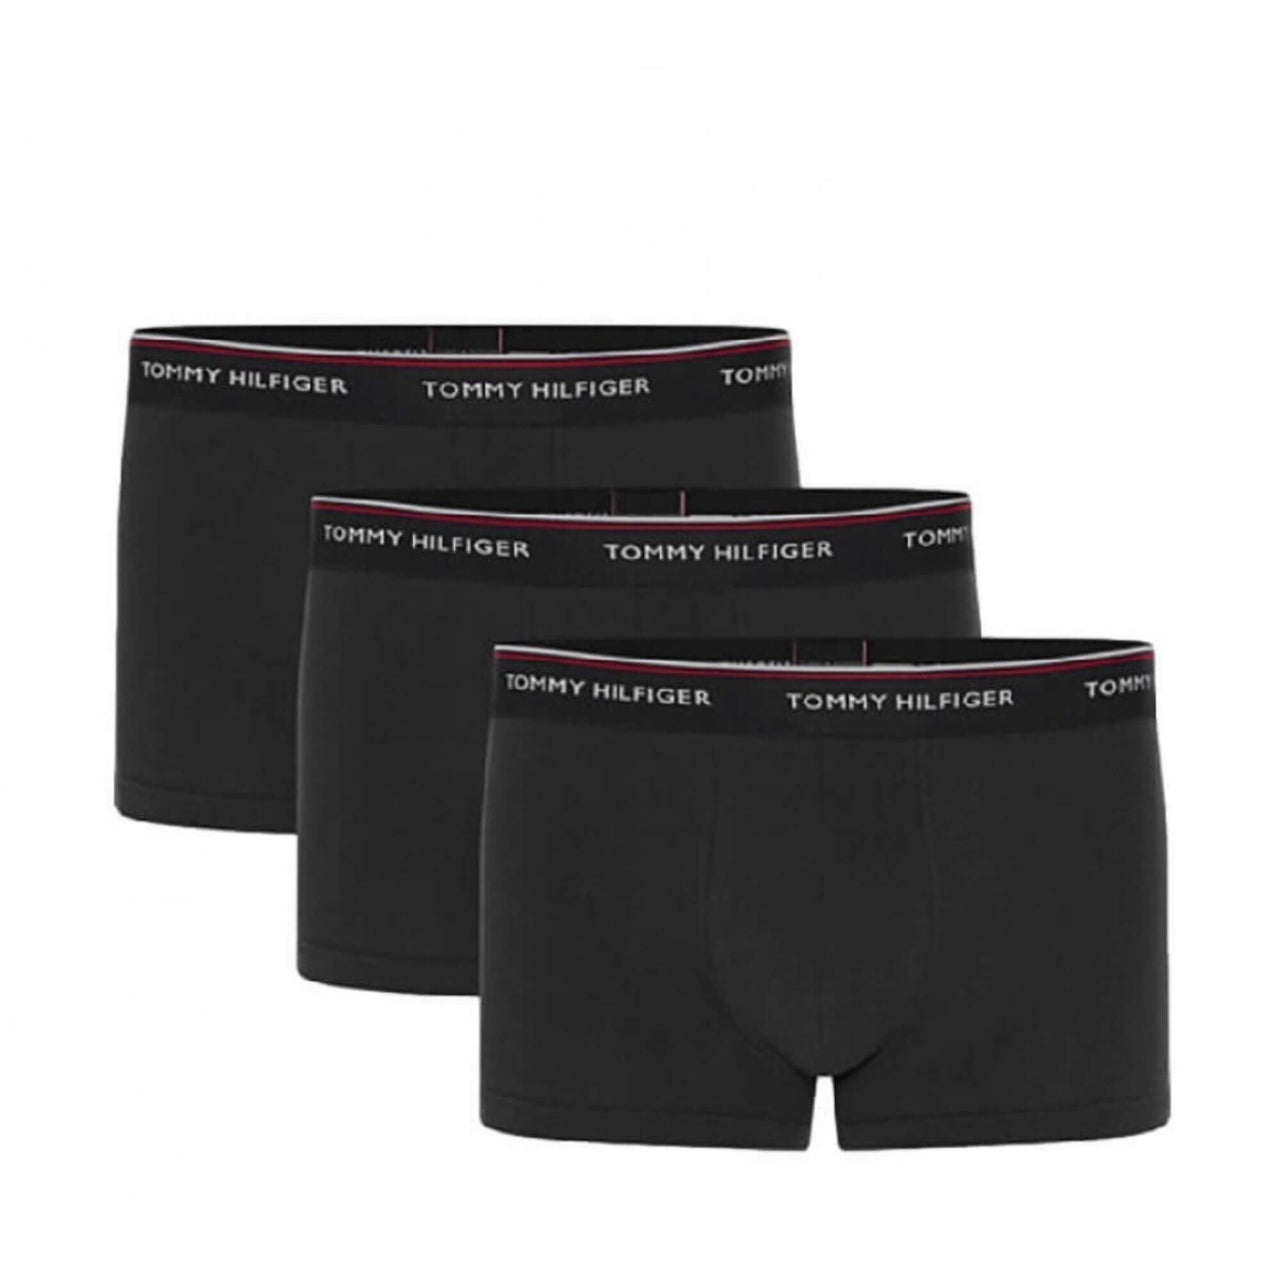 1U87903841990 CALZONCILLO BOXER TOMMY 3P LR TRUNK